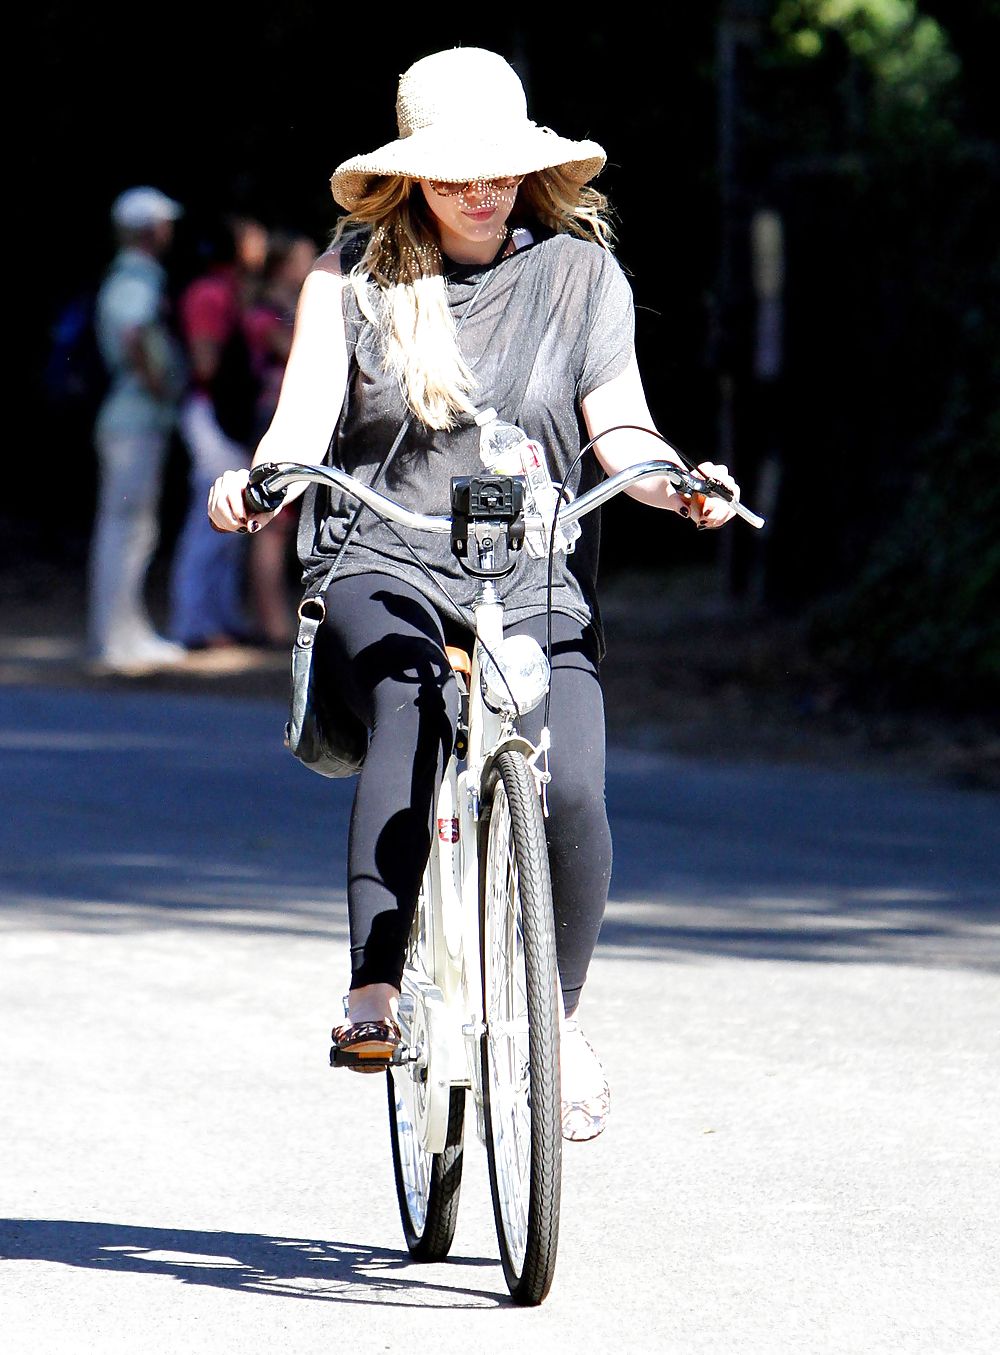 Hilary Duff - out riding her bike in Toluca Lake #5548555